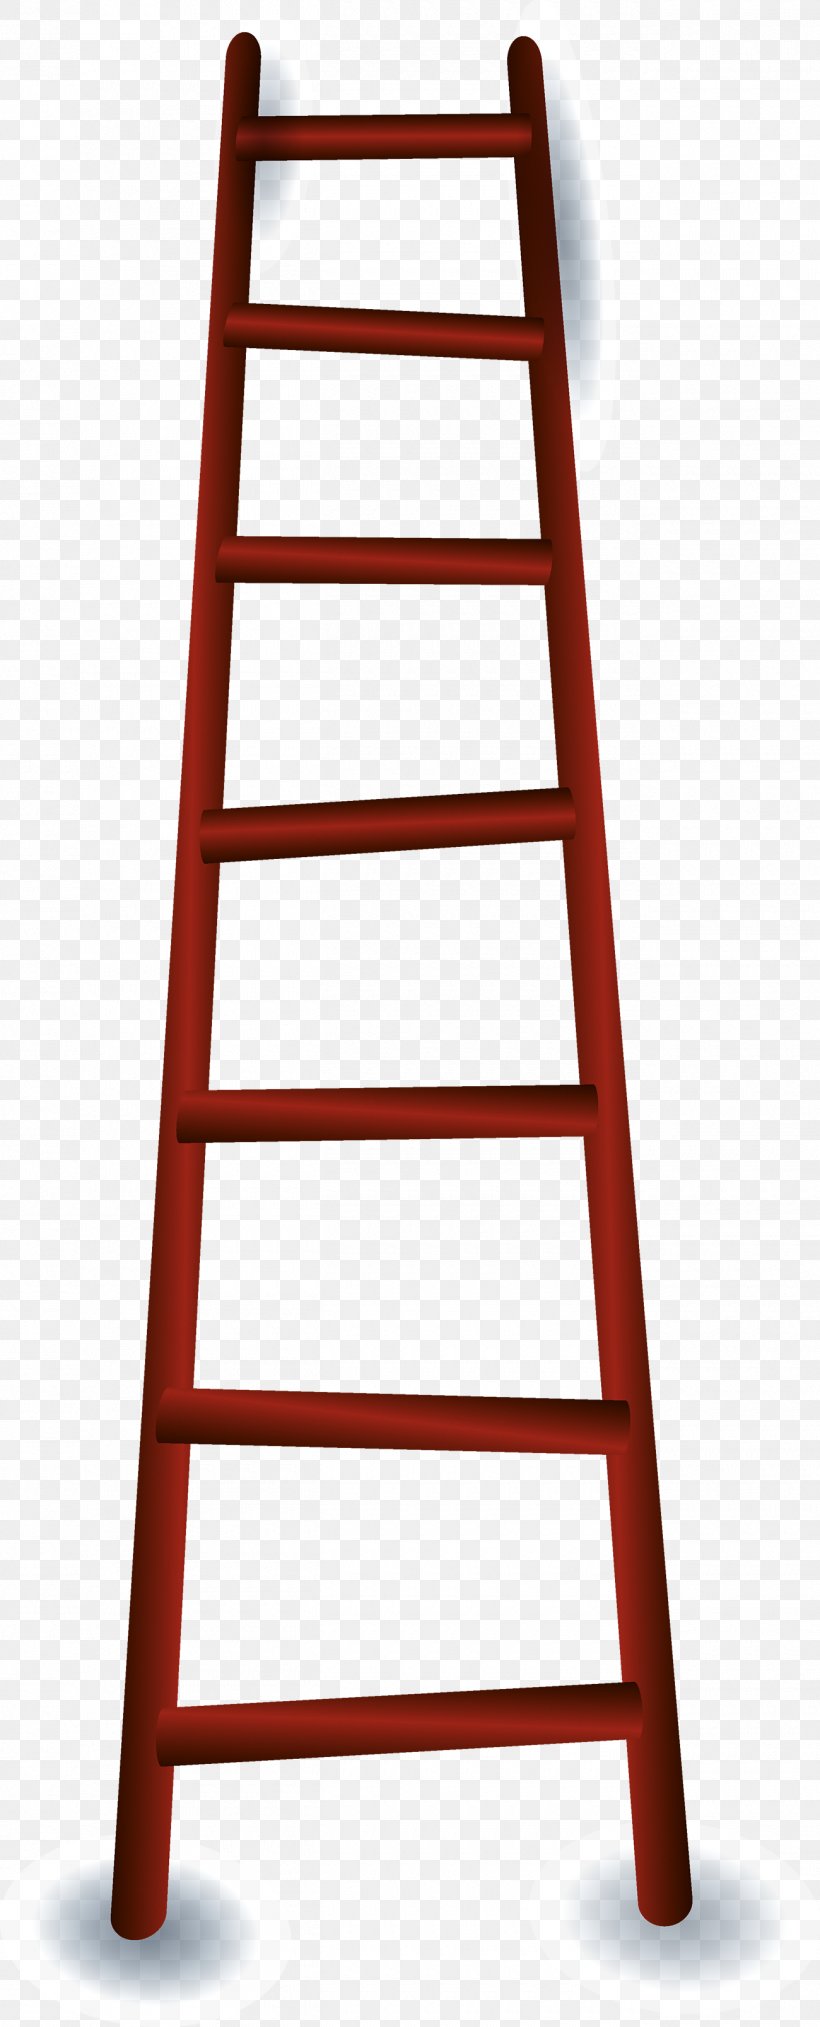 Ladder Stairs Clip Art, PNG, 1300x3214px, Ladder, Animation, Pixel, Stairs, Upload Download Free